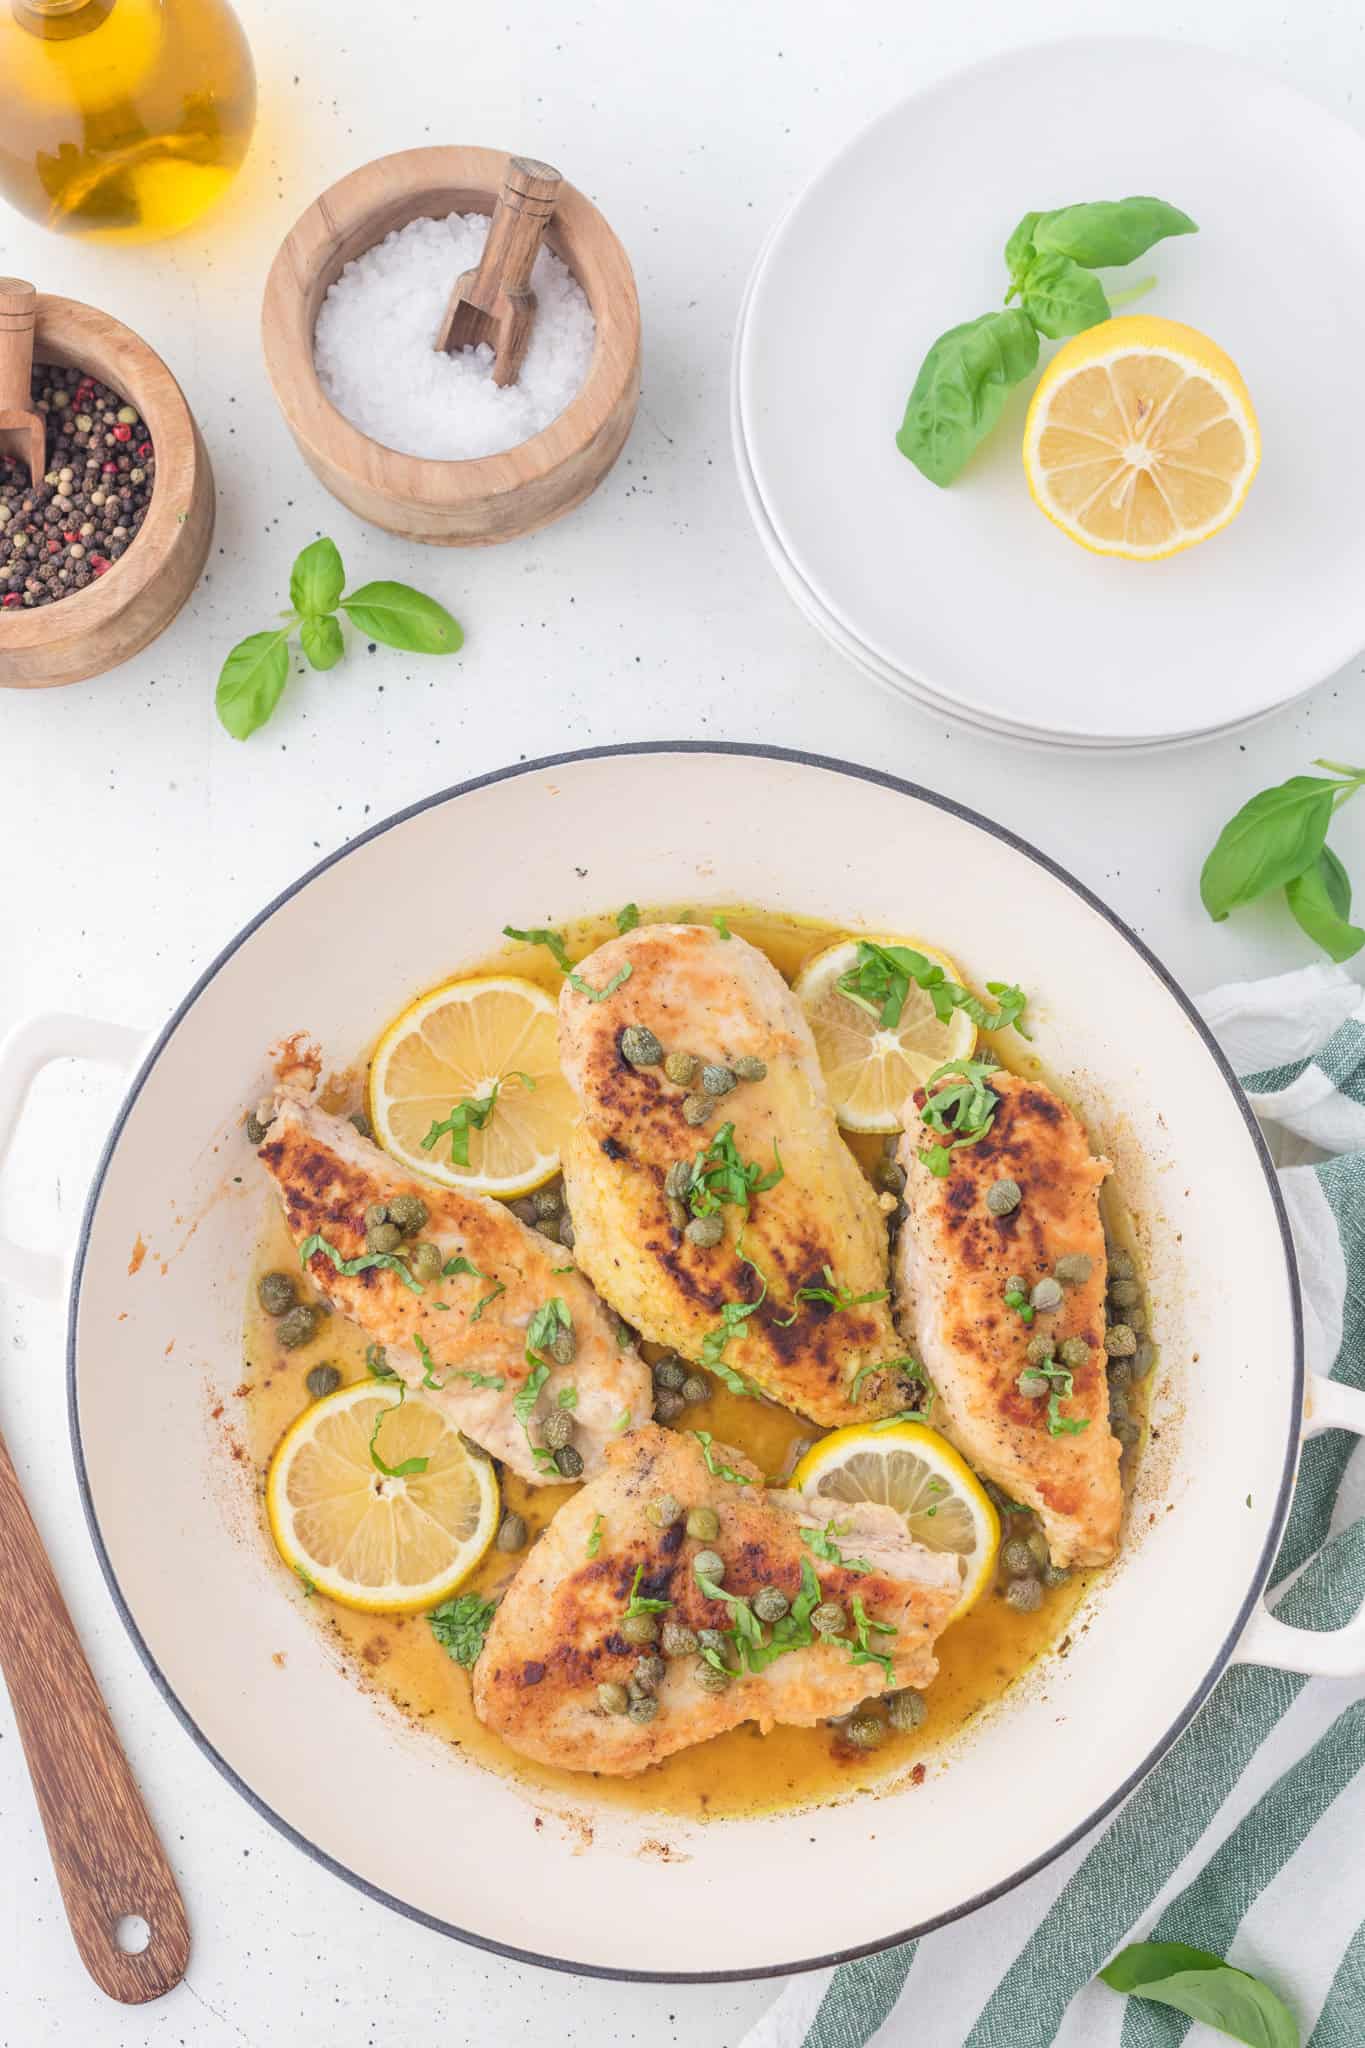 Chicken Piccata is a delicious chicken dinner recipe using boneless, skinless chicken breasts dredged in flour, cooked until golden browned and served in a tasty lemon sauce with capers.